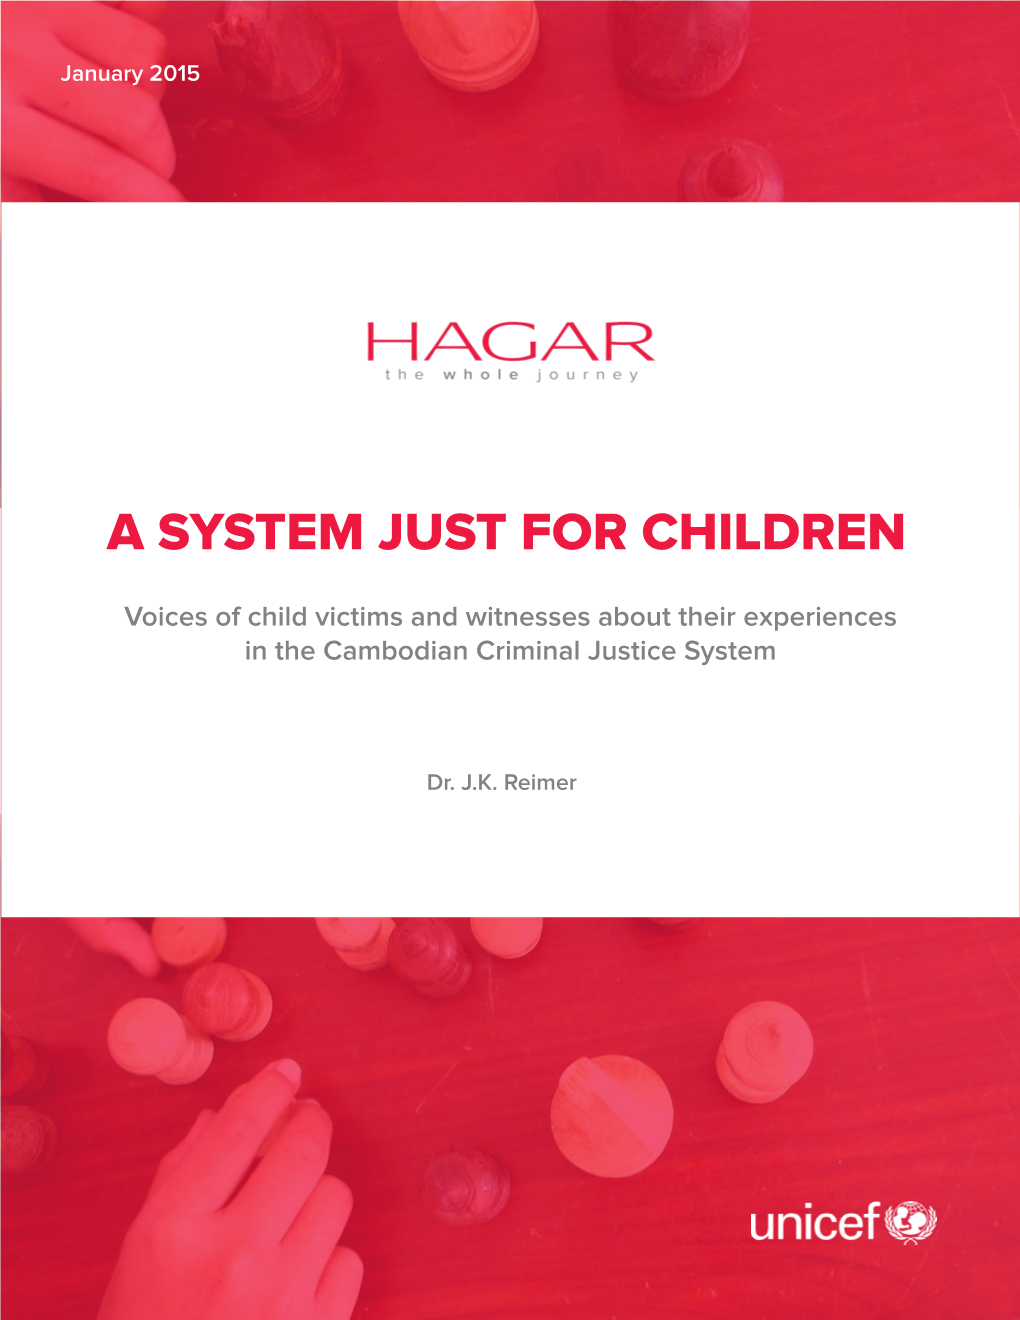 A SYSTEM JUST for CHILDREN: Voices of Child Victims and Witnesses About Their Experiences in the Cambodian Criminal Justice System